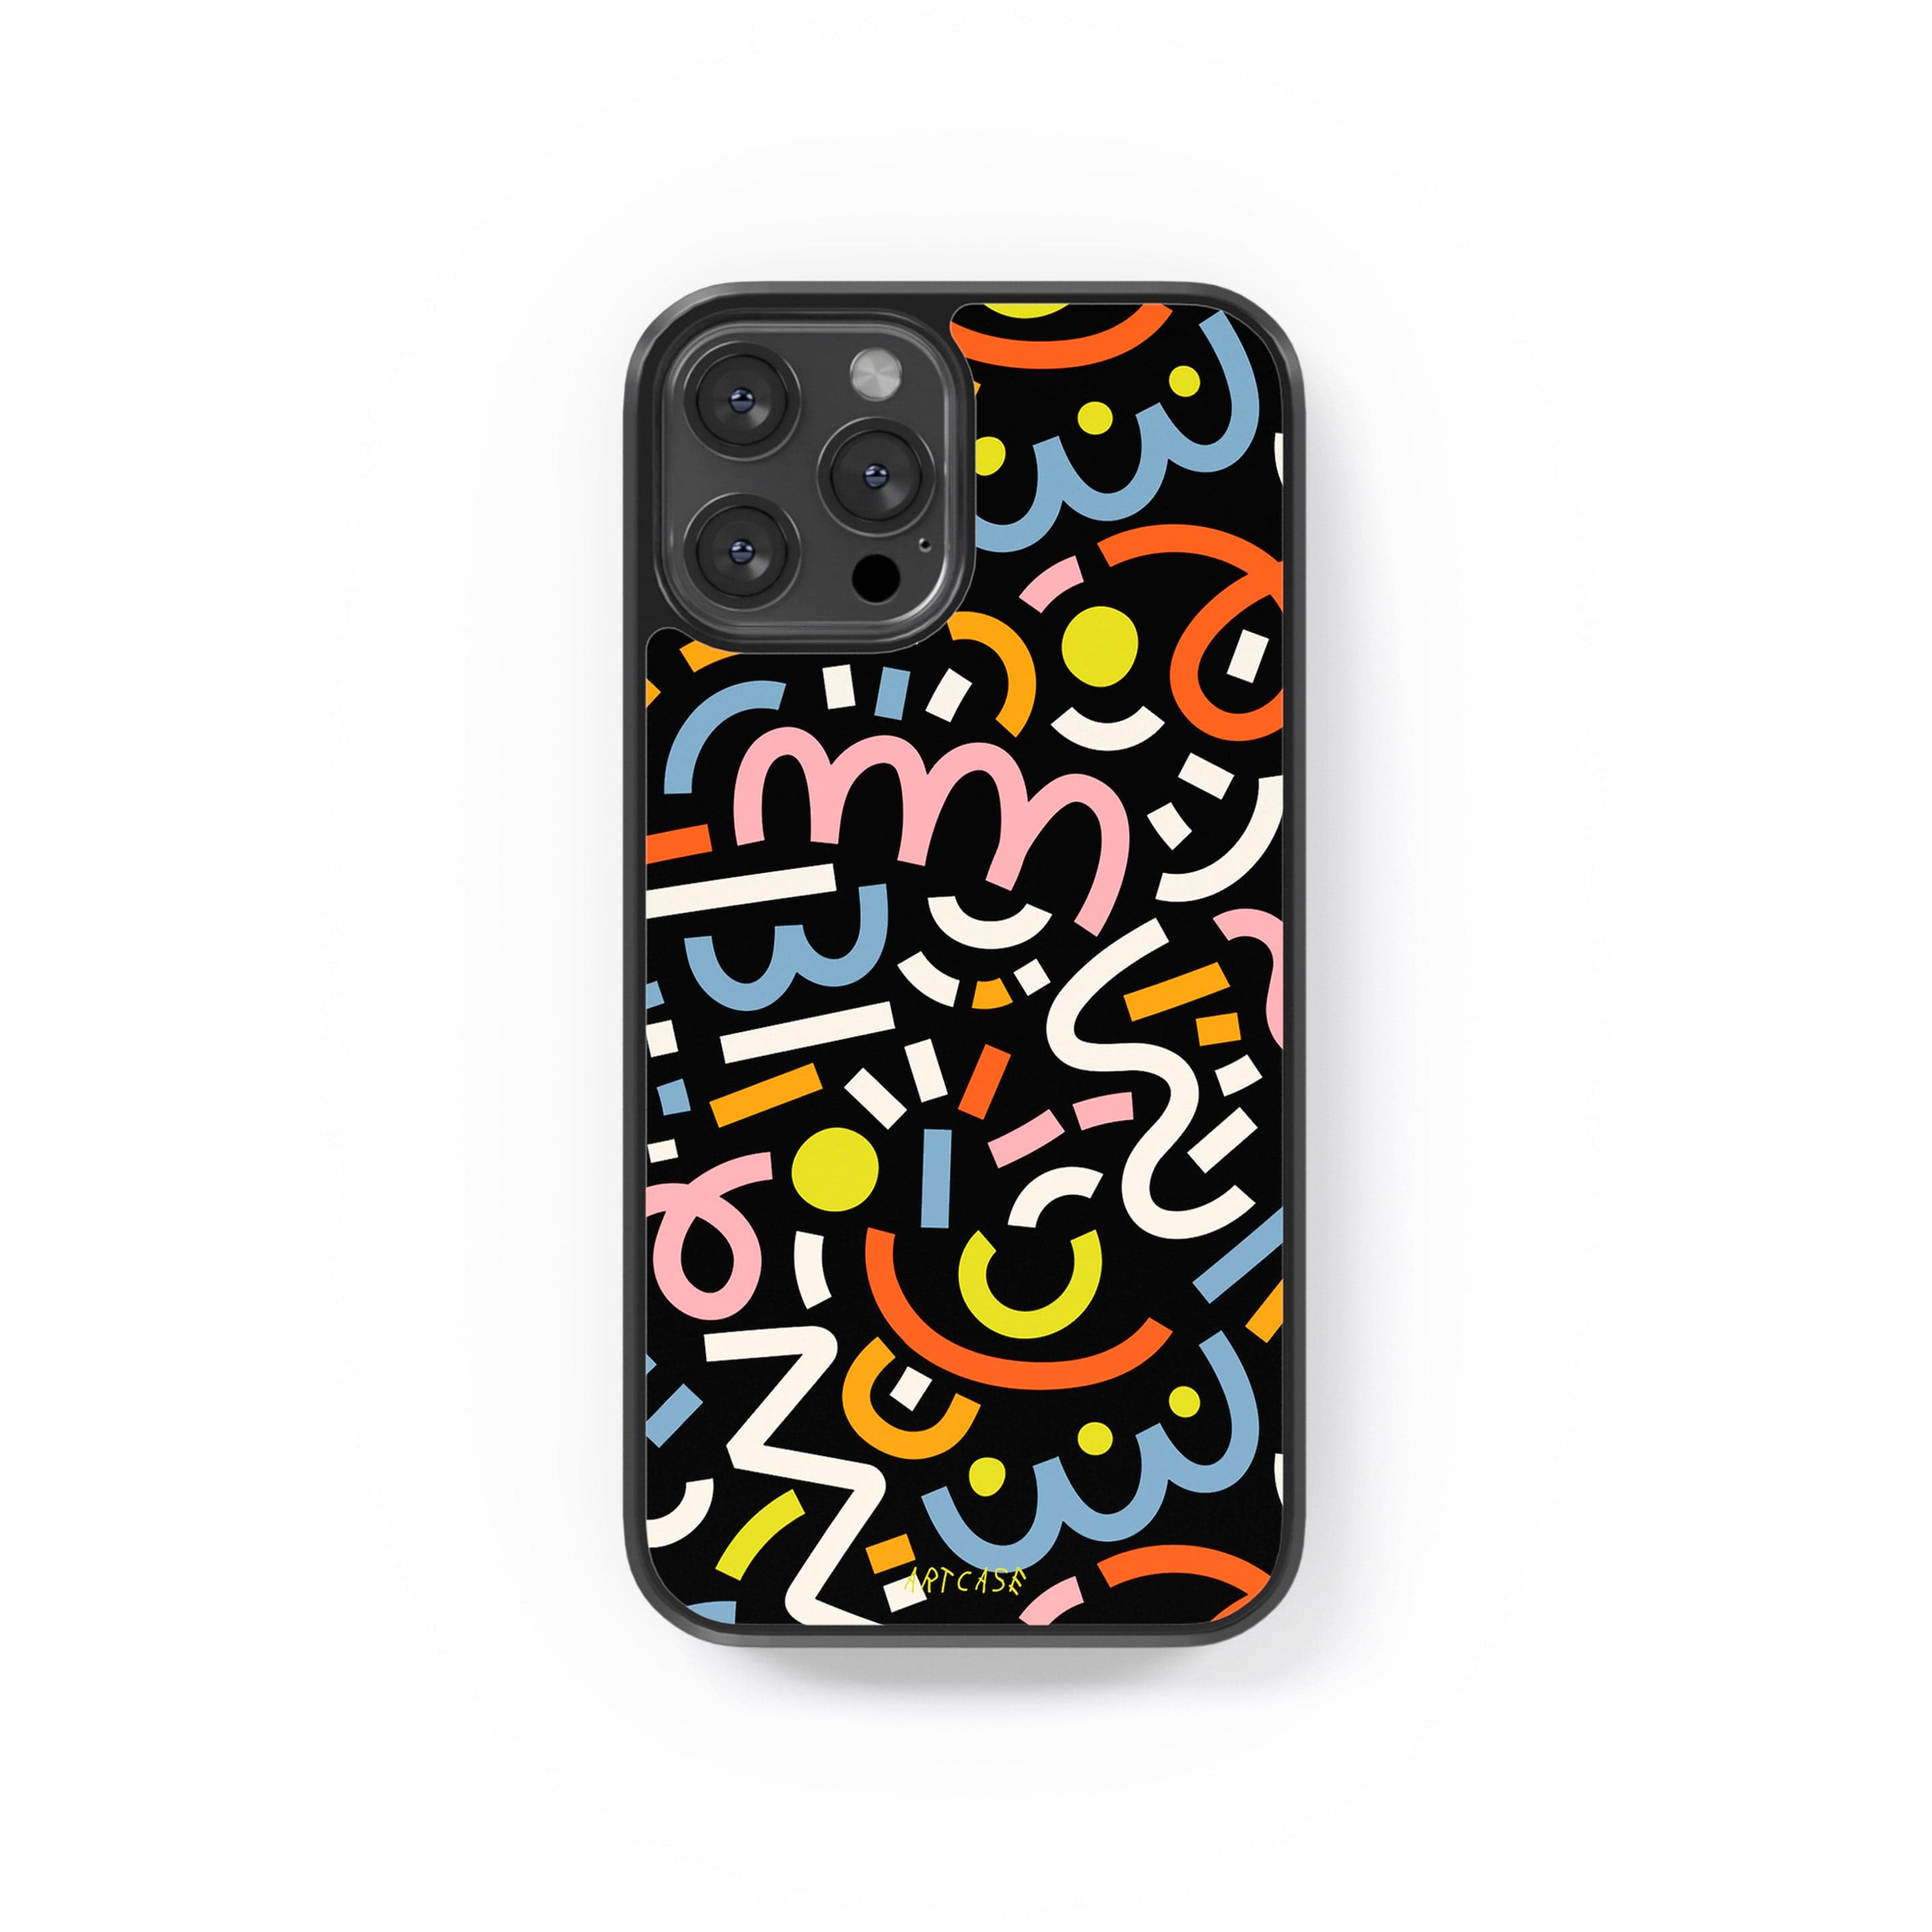 Phone case "Multicolored patterns"